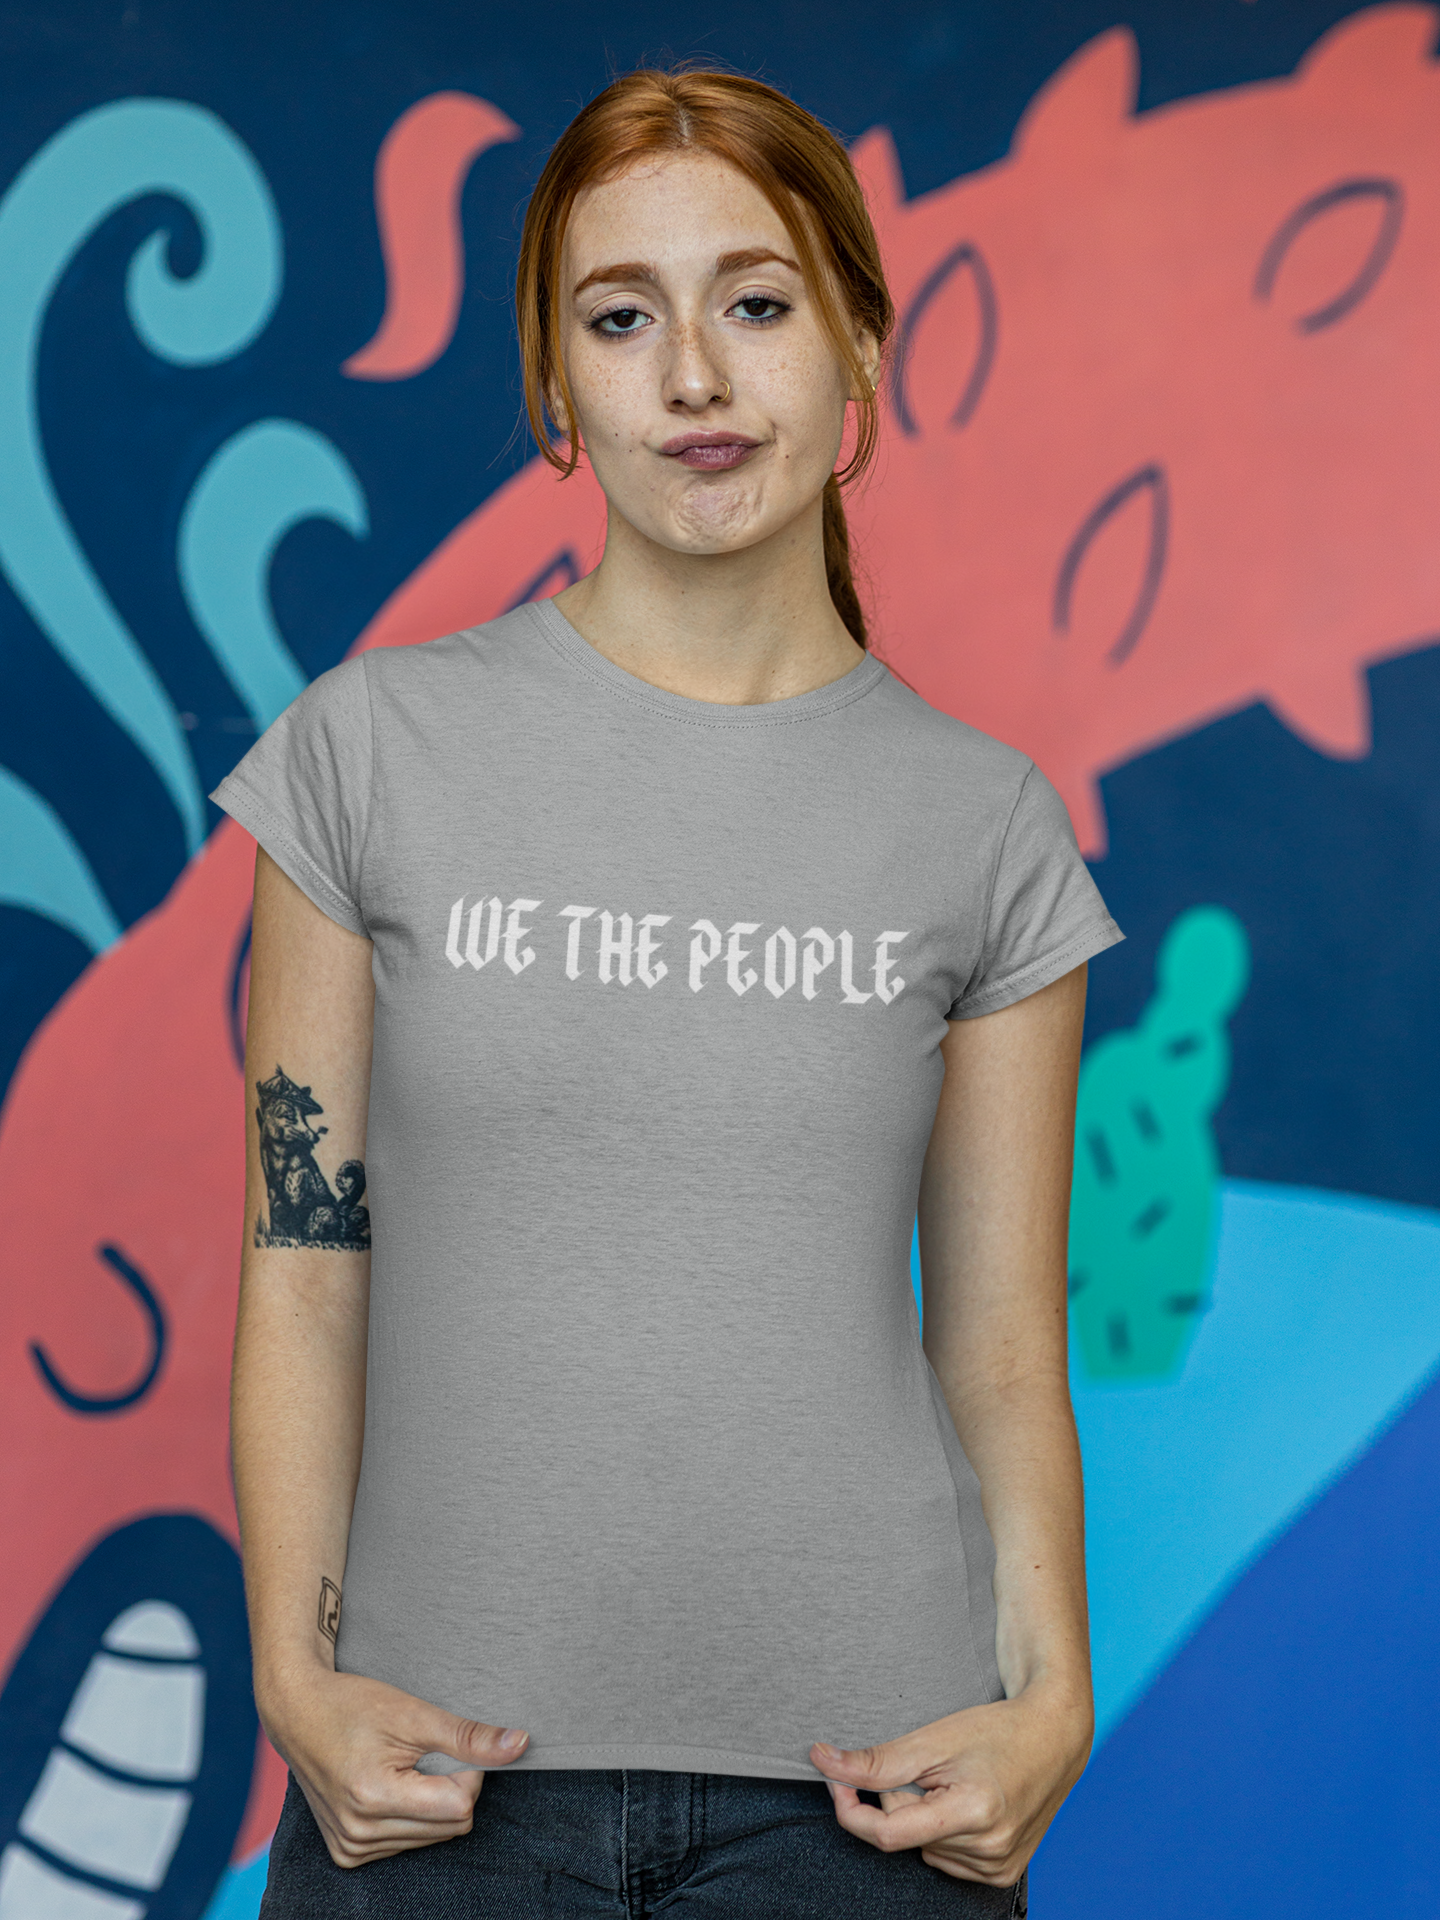 We The People T-Shirt Dam. The People's Foundation was established in 2012 as a non-profit organisation. T-Shirt i många färger och storlekar